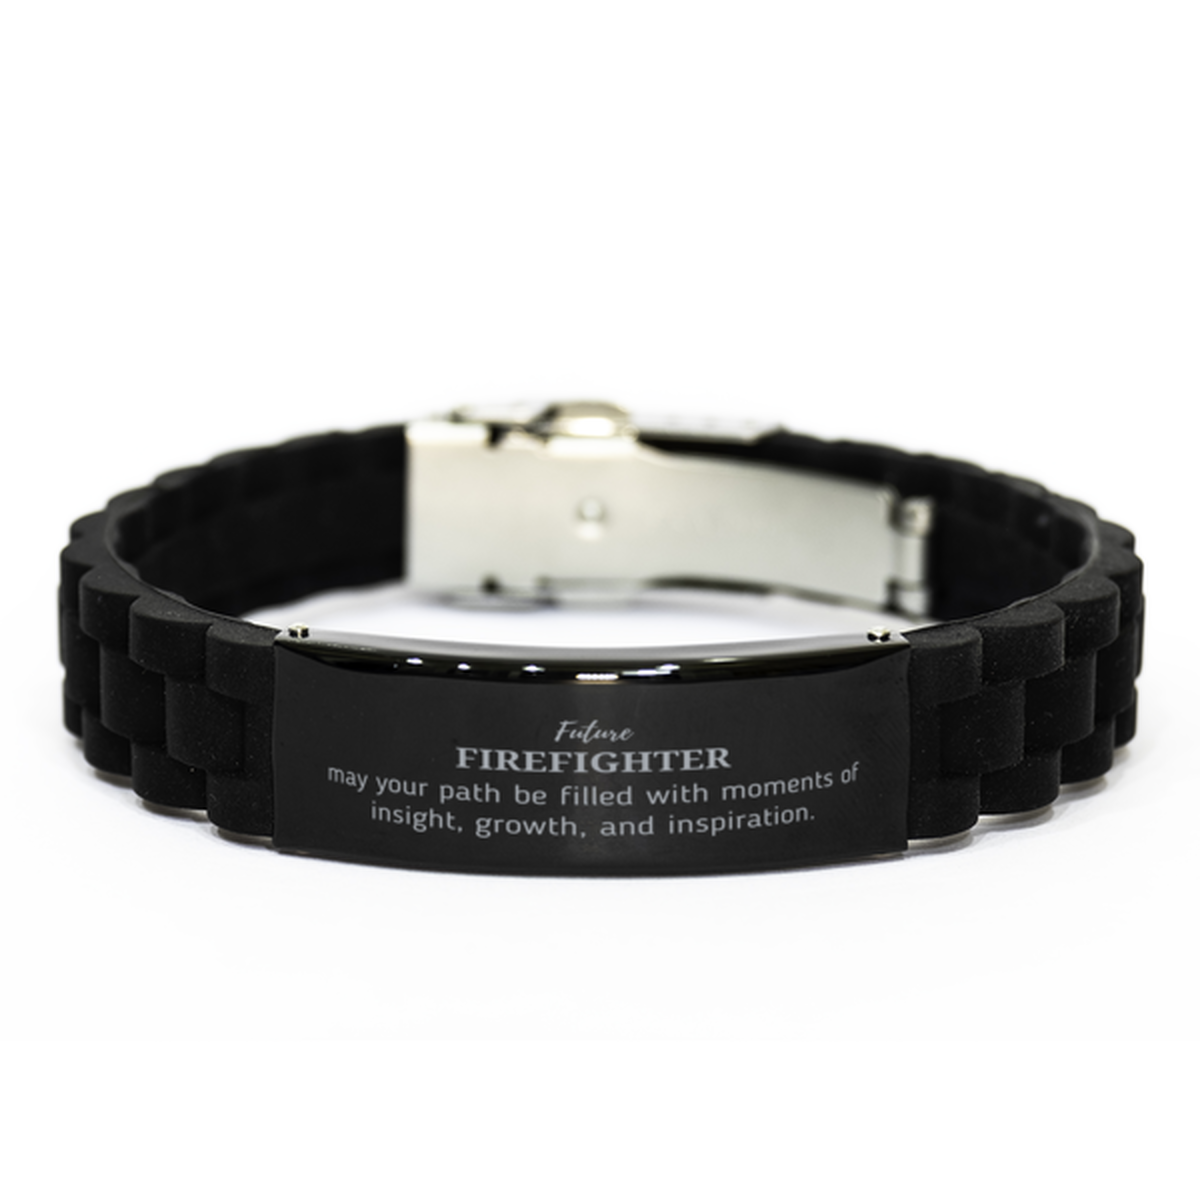 Future Firefighter Gifts, May your path be filled with moments of insight, Graduation Gifts for New Firefighter, Christmas Unique Black Glidelock Clasp Bracelet For Men, Women, Friends